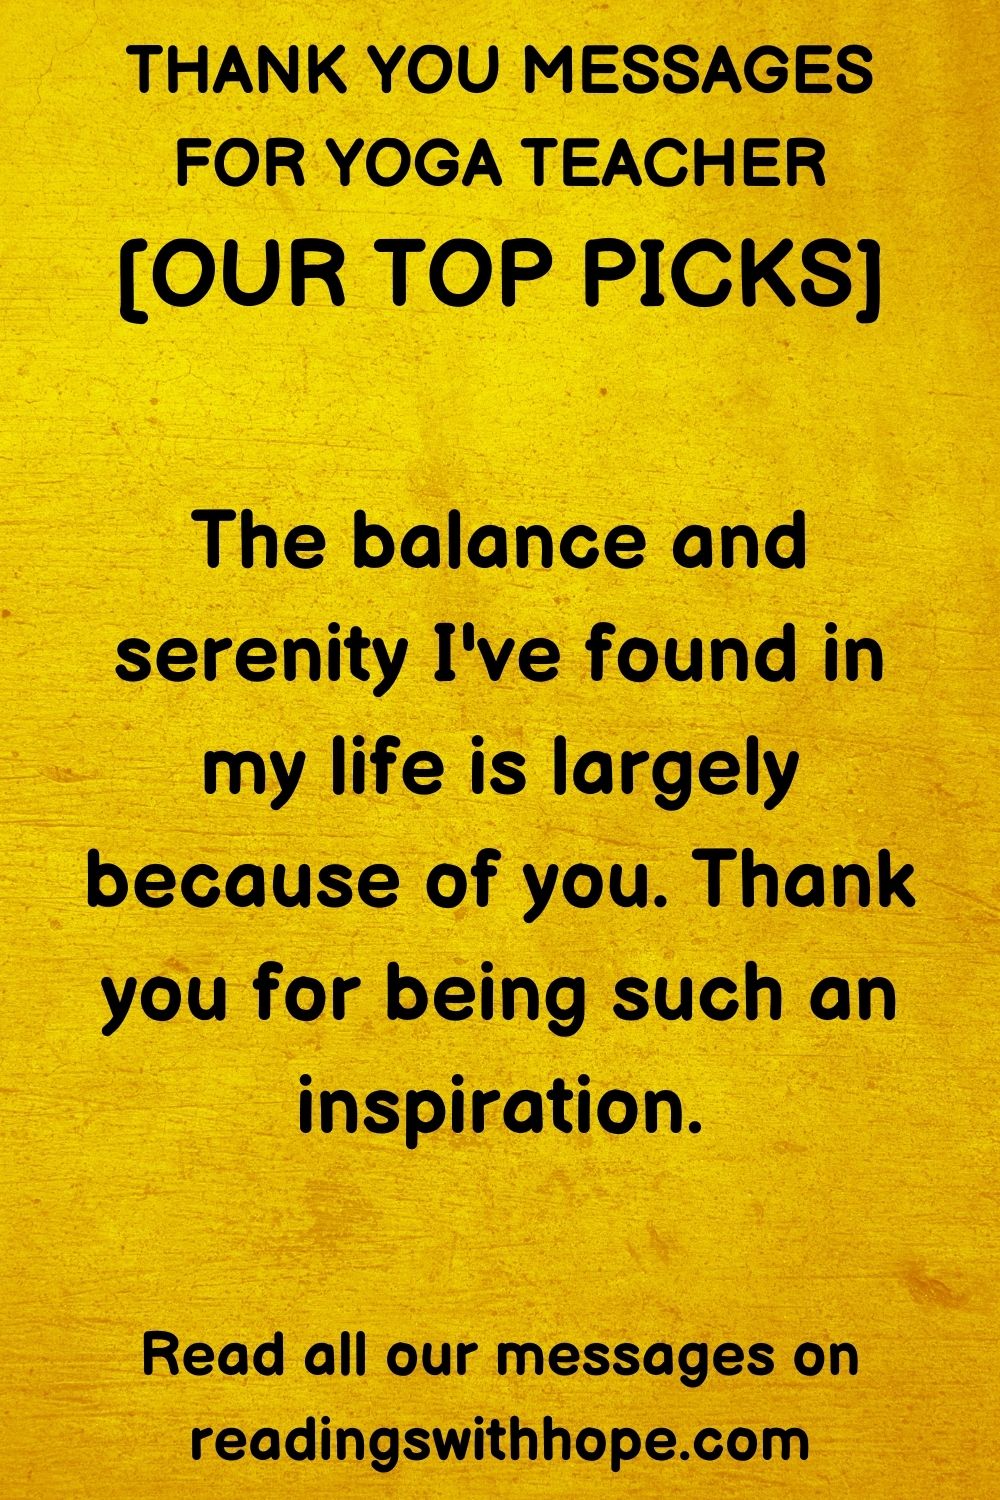 thank you message for yoga teacher that says The balance and serenity I've found in my life is largely because of you. Thank you for being such an inspiration.